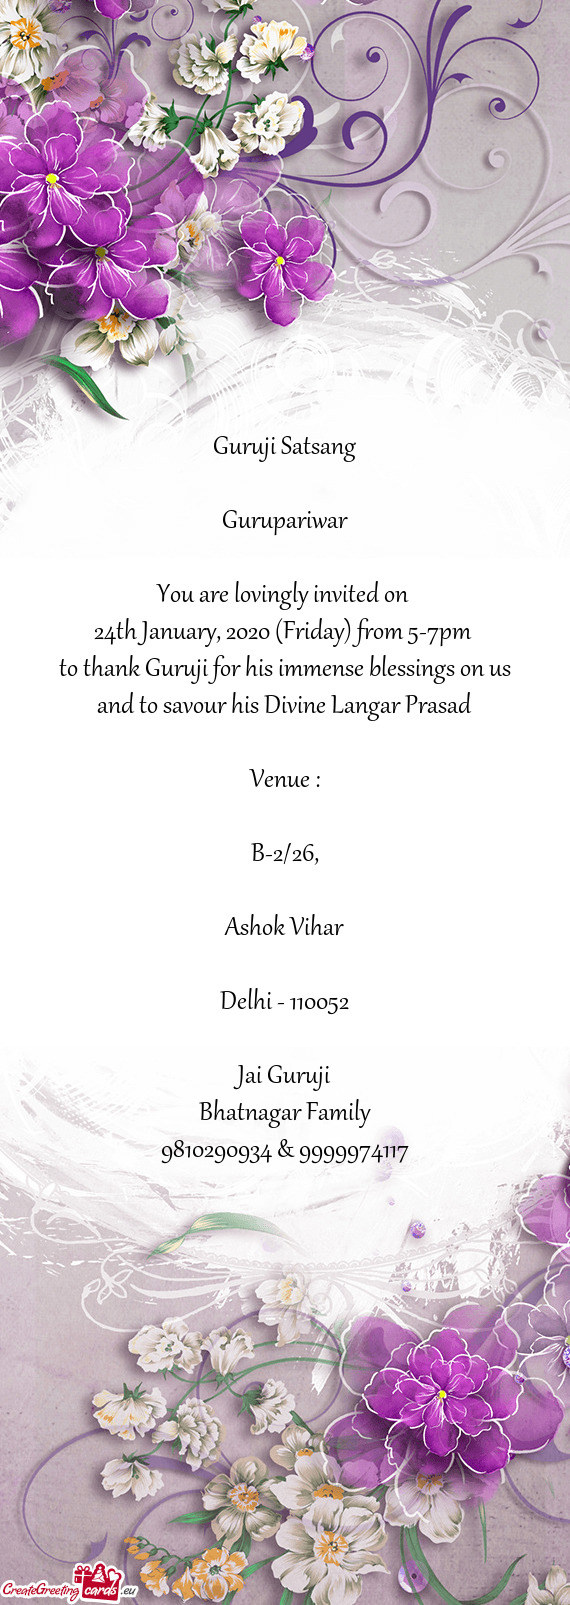 24th January, 2020 (Friday) from 5-7pm